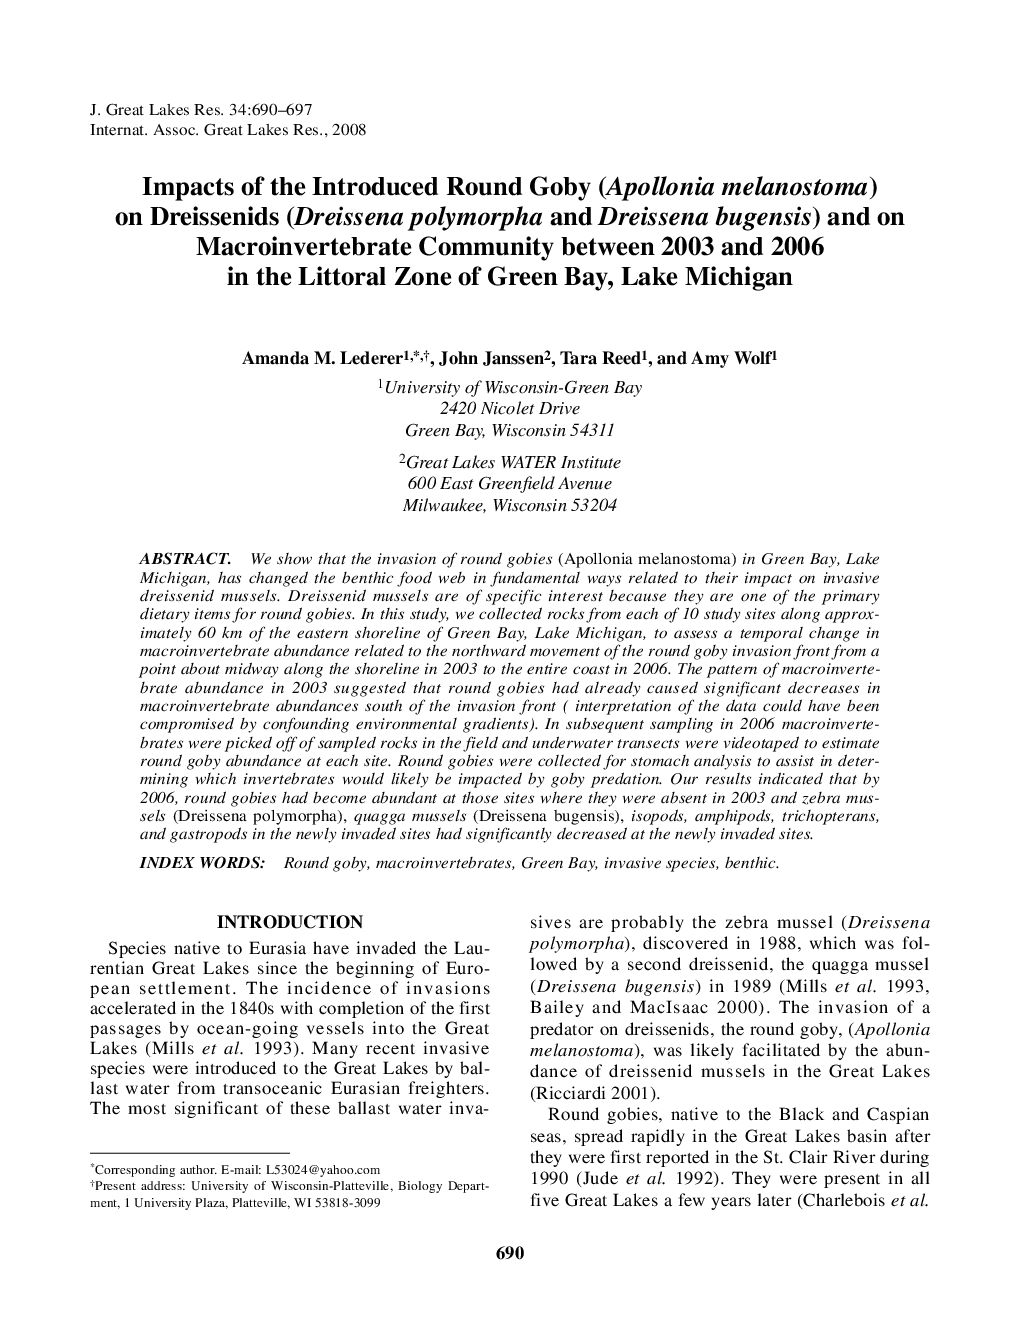 Impacts of the Introduced Round Goby (Apollonia melanostoma) on Dreissenids (Dreissena polymorpha and Dreissena bugensis) and on Macroinvertebrate Community between 2003 and 2006 in the Littoral Zone of Green Bay, Lake Michigan